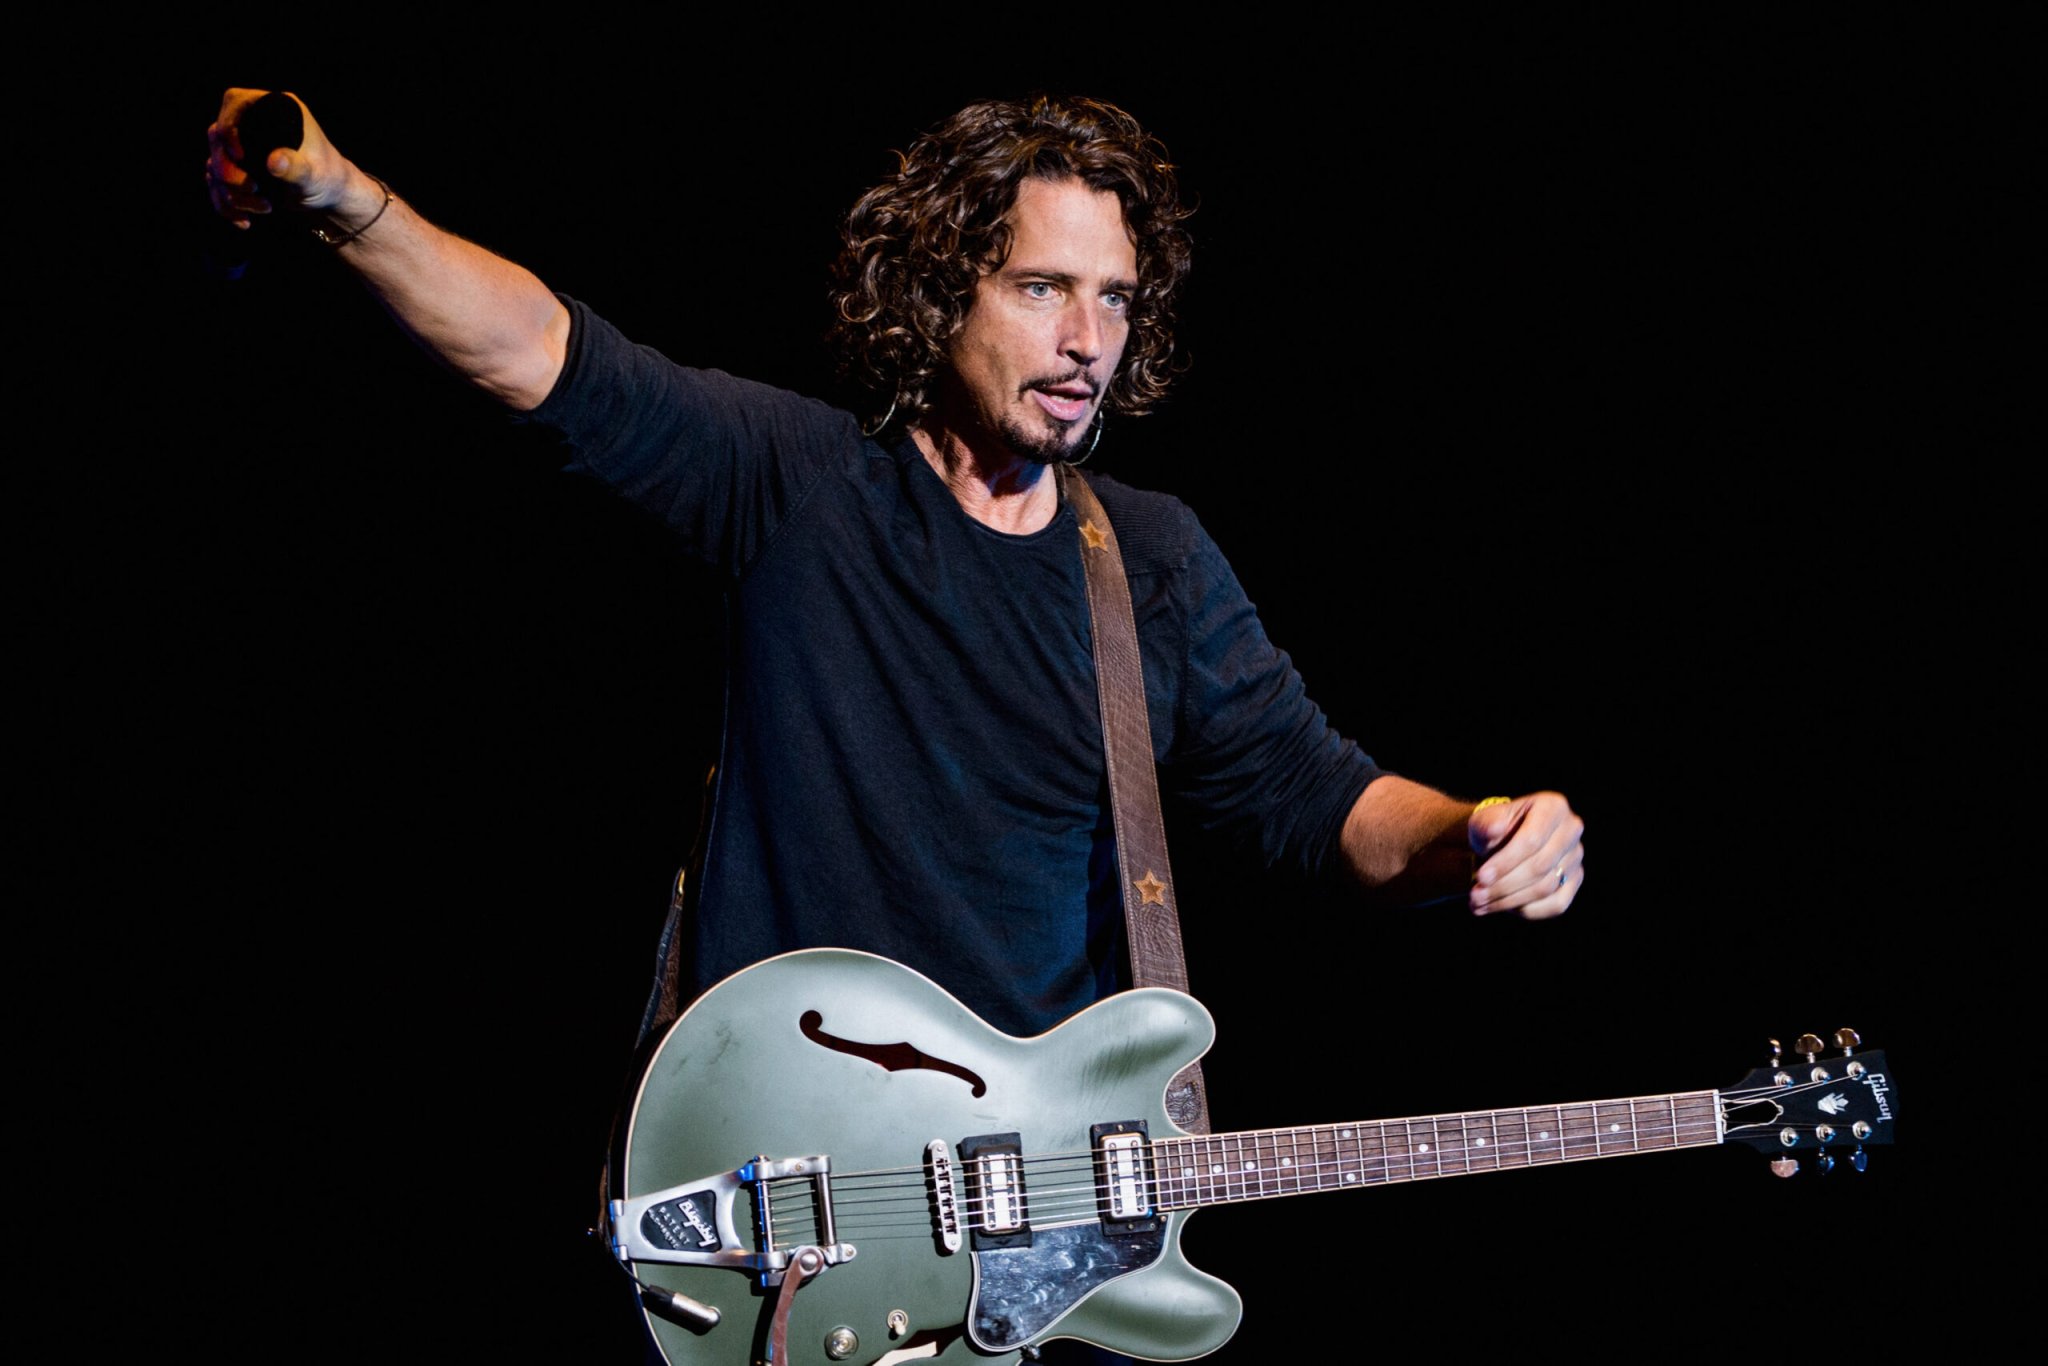 Remembering Chris Cornell, 5 Years Later